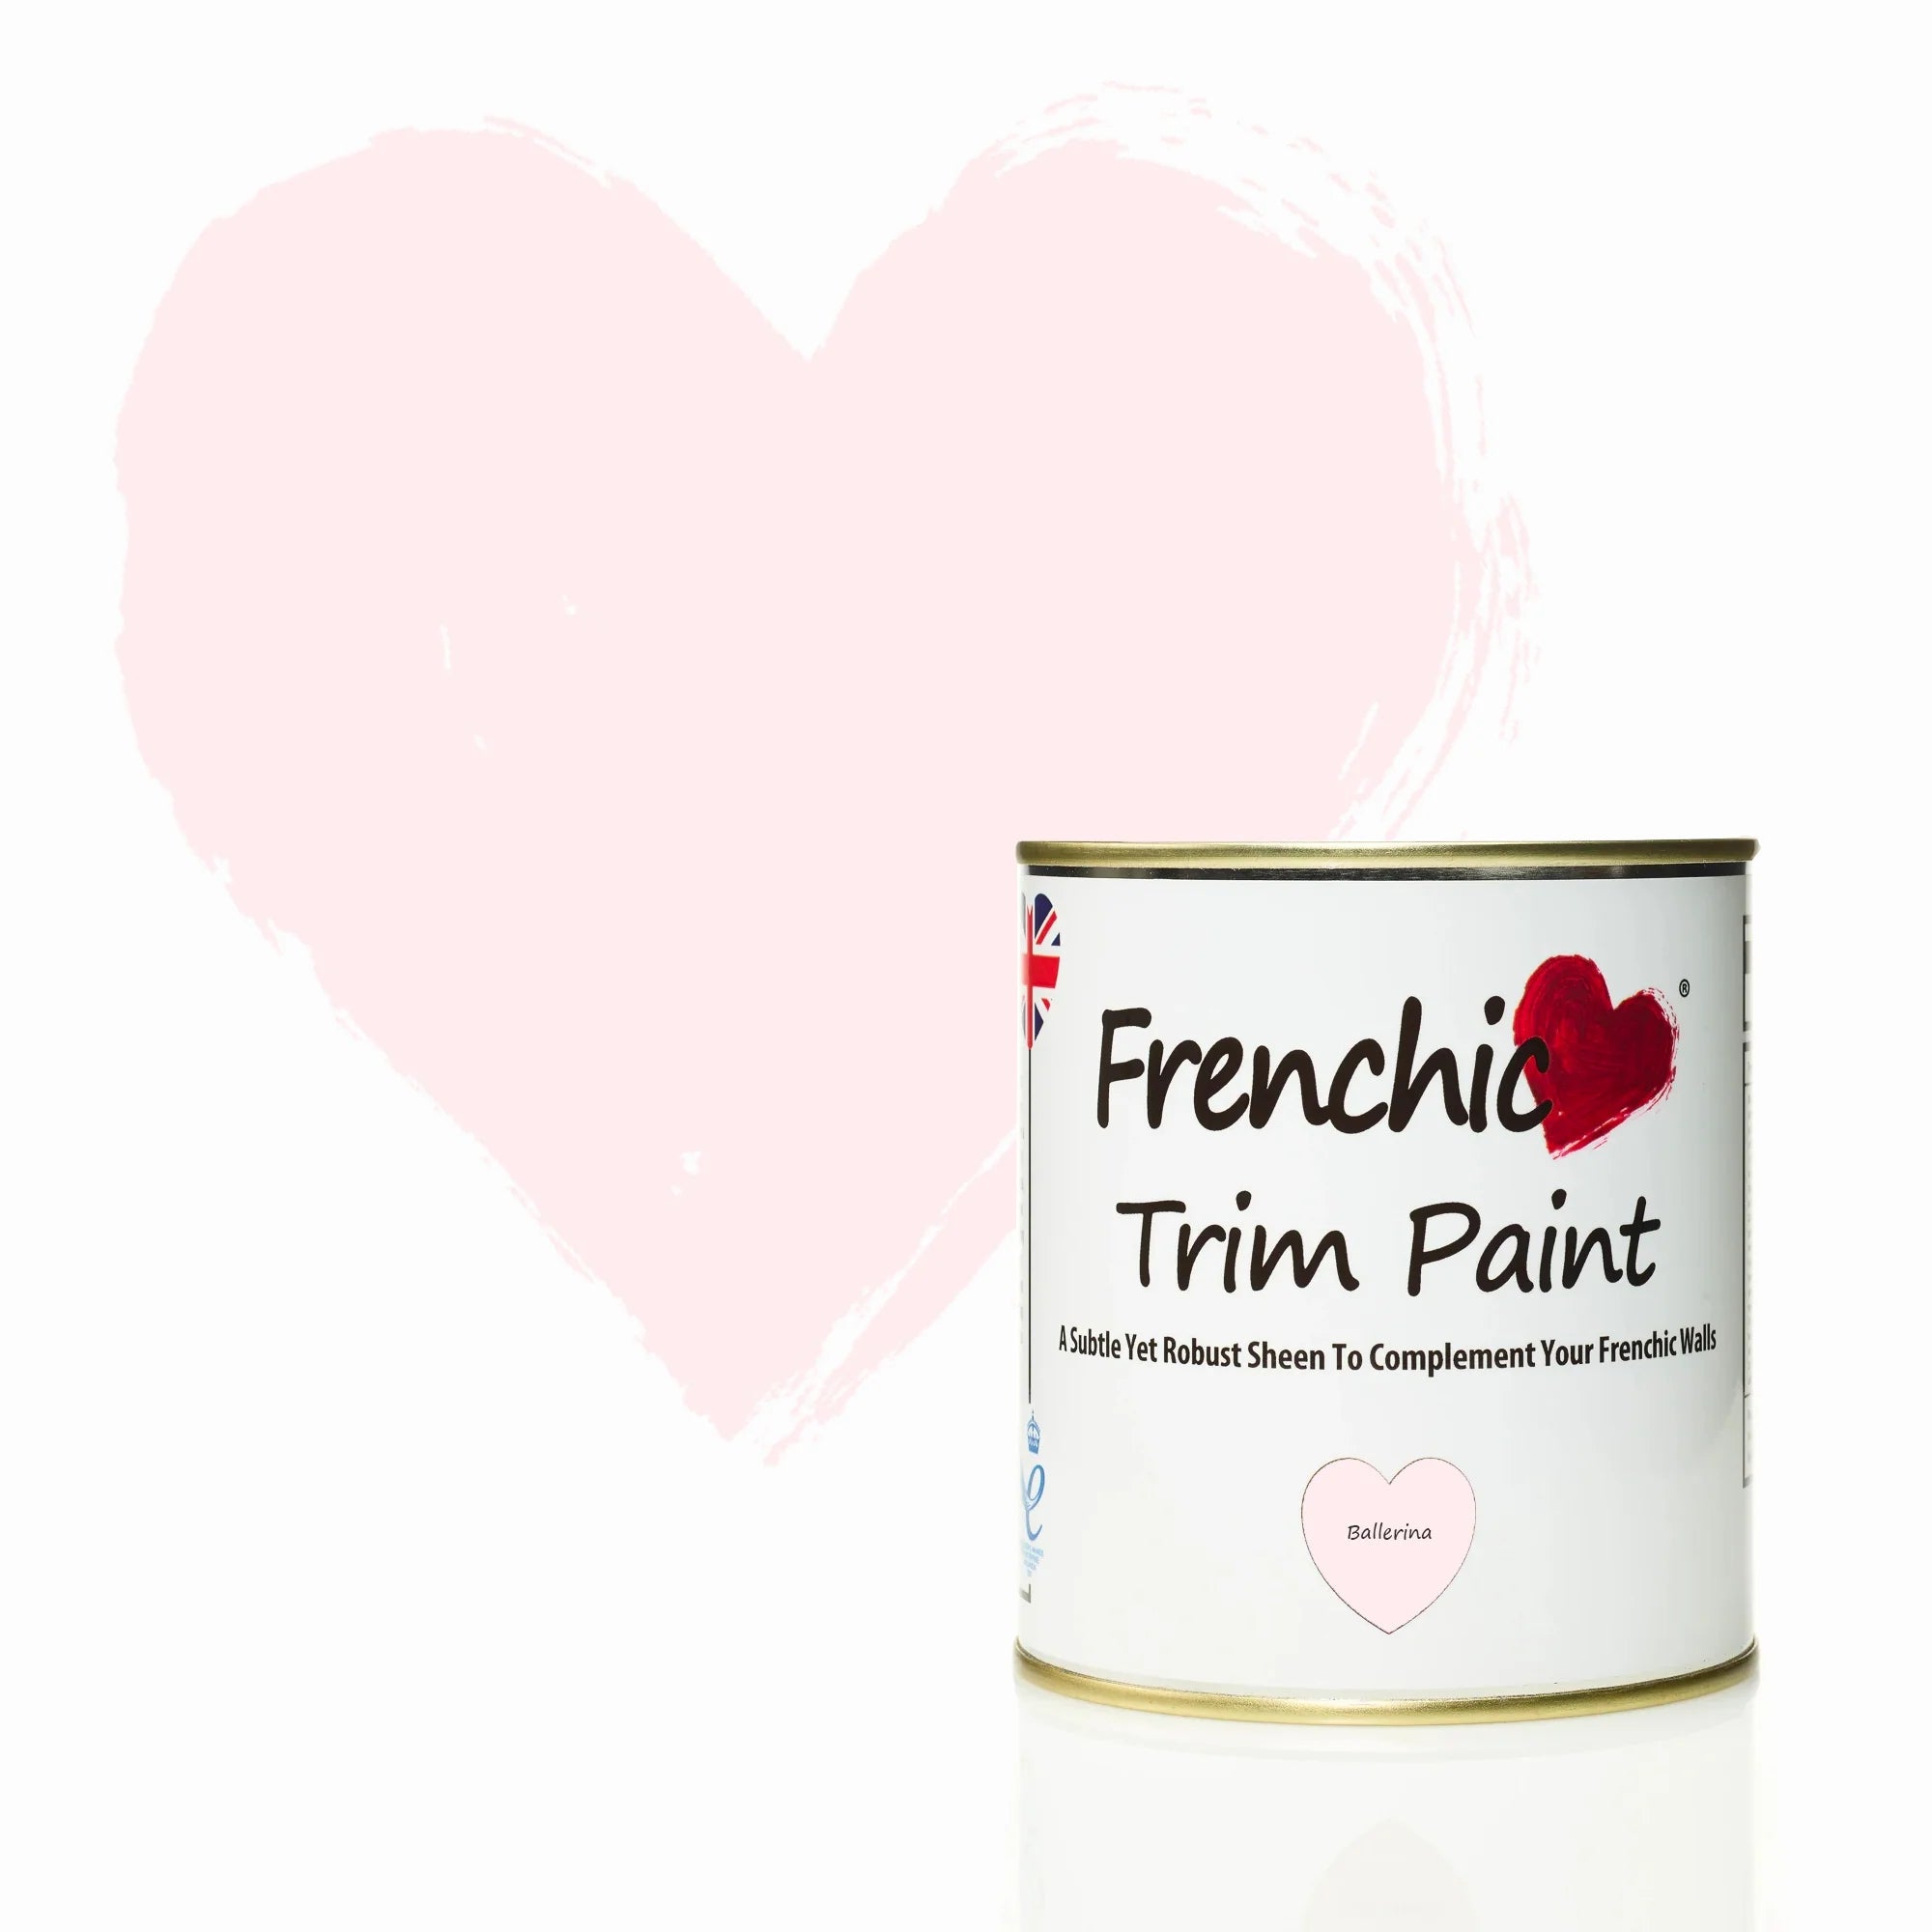 Frenchic Paint Ballerina Trim Paint Frenchic Paint Trim Paint Range by Weirs of Baggot Street Irelands Largest and most Trusted Stockist of Frenchic Paint. Shop online for Nationwide and Same Day Dublin Delivery